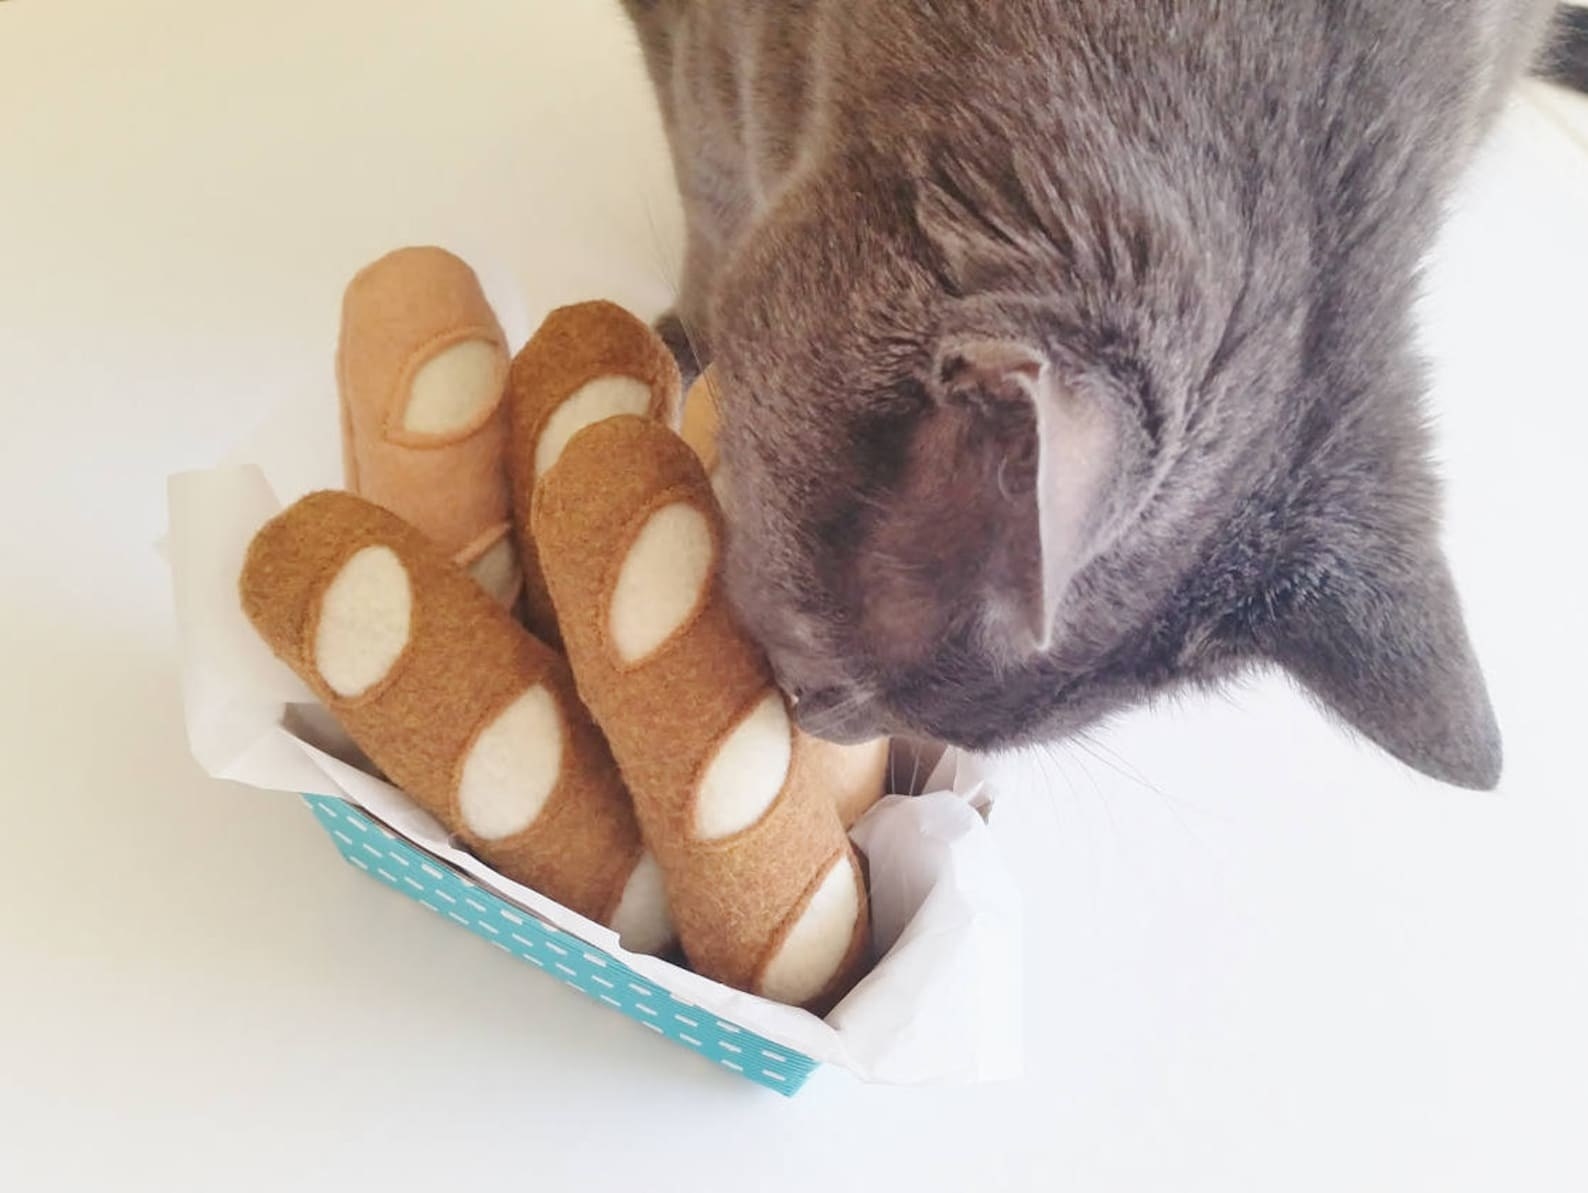 a cat sniffing a basket of bread toys